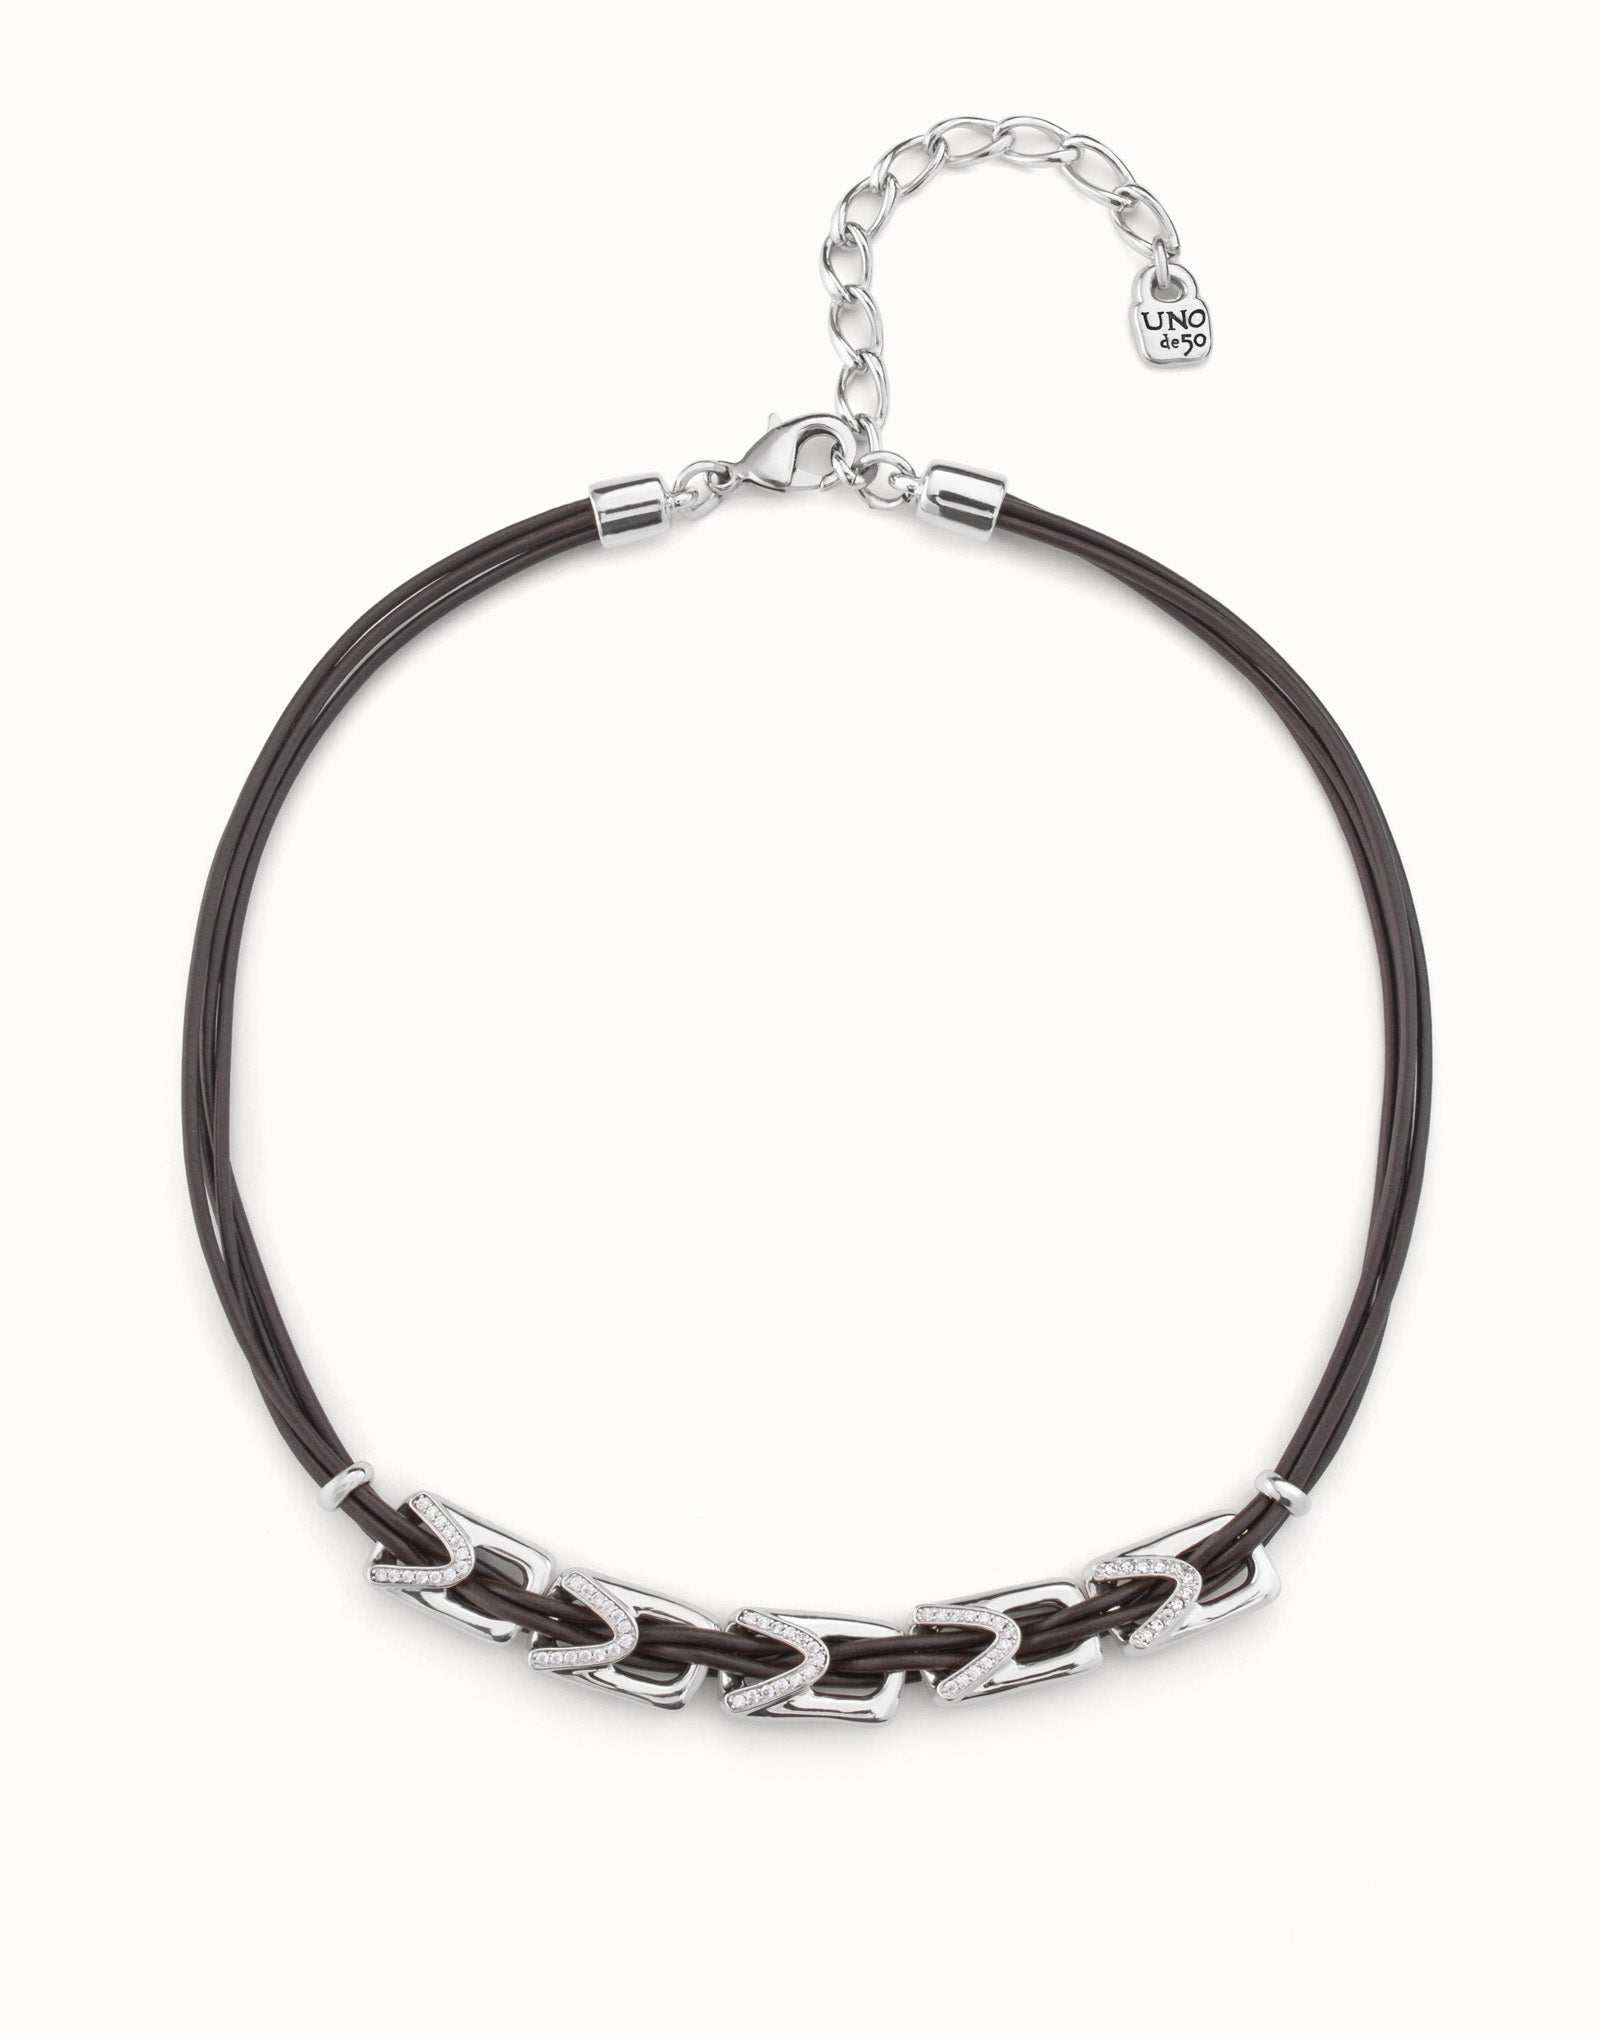 Daring topaz Leather Necklace | Uno de 50 | Luby 